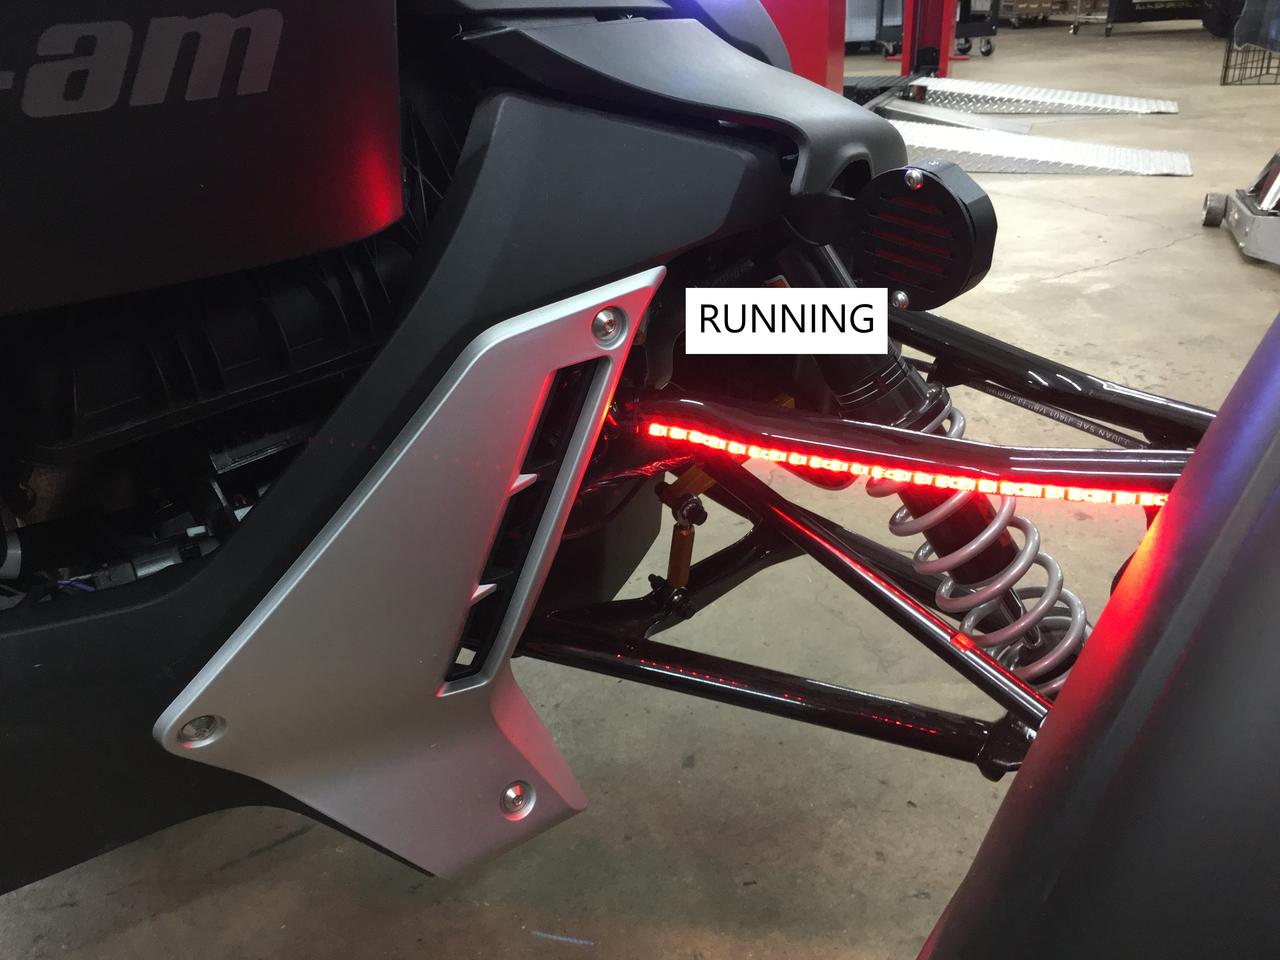 A-Arm Running/Turn Signal LED Lighting Kit - Complete Stand-Alone Kit (Ryker Models)